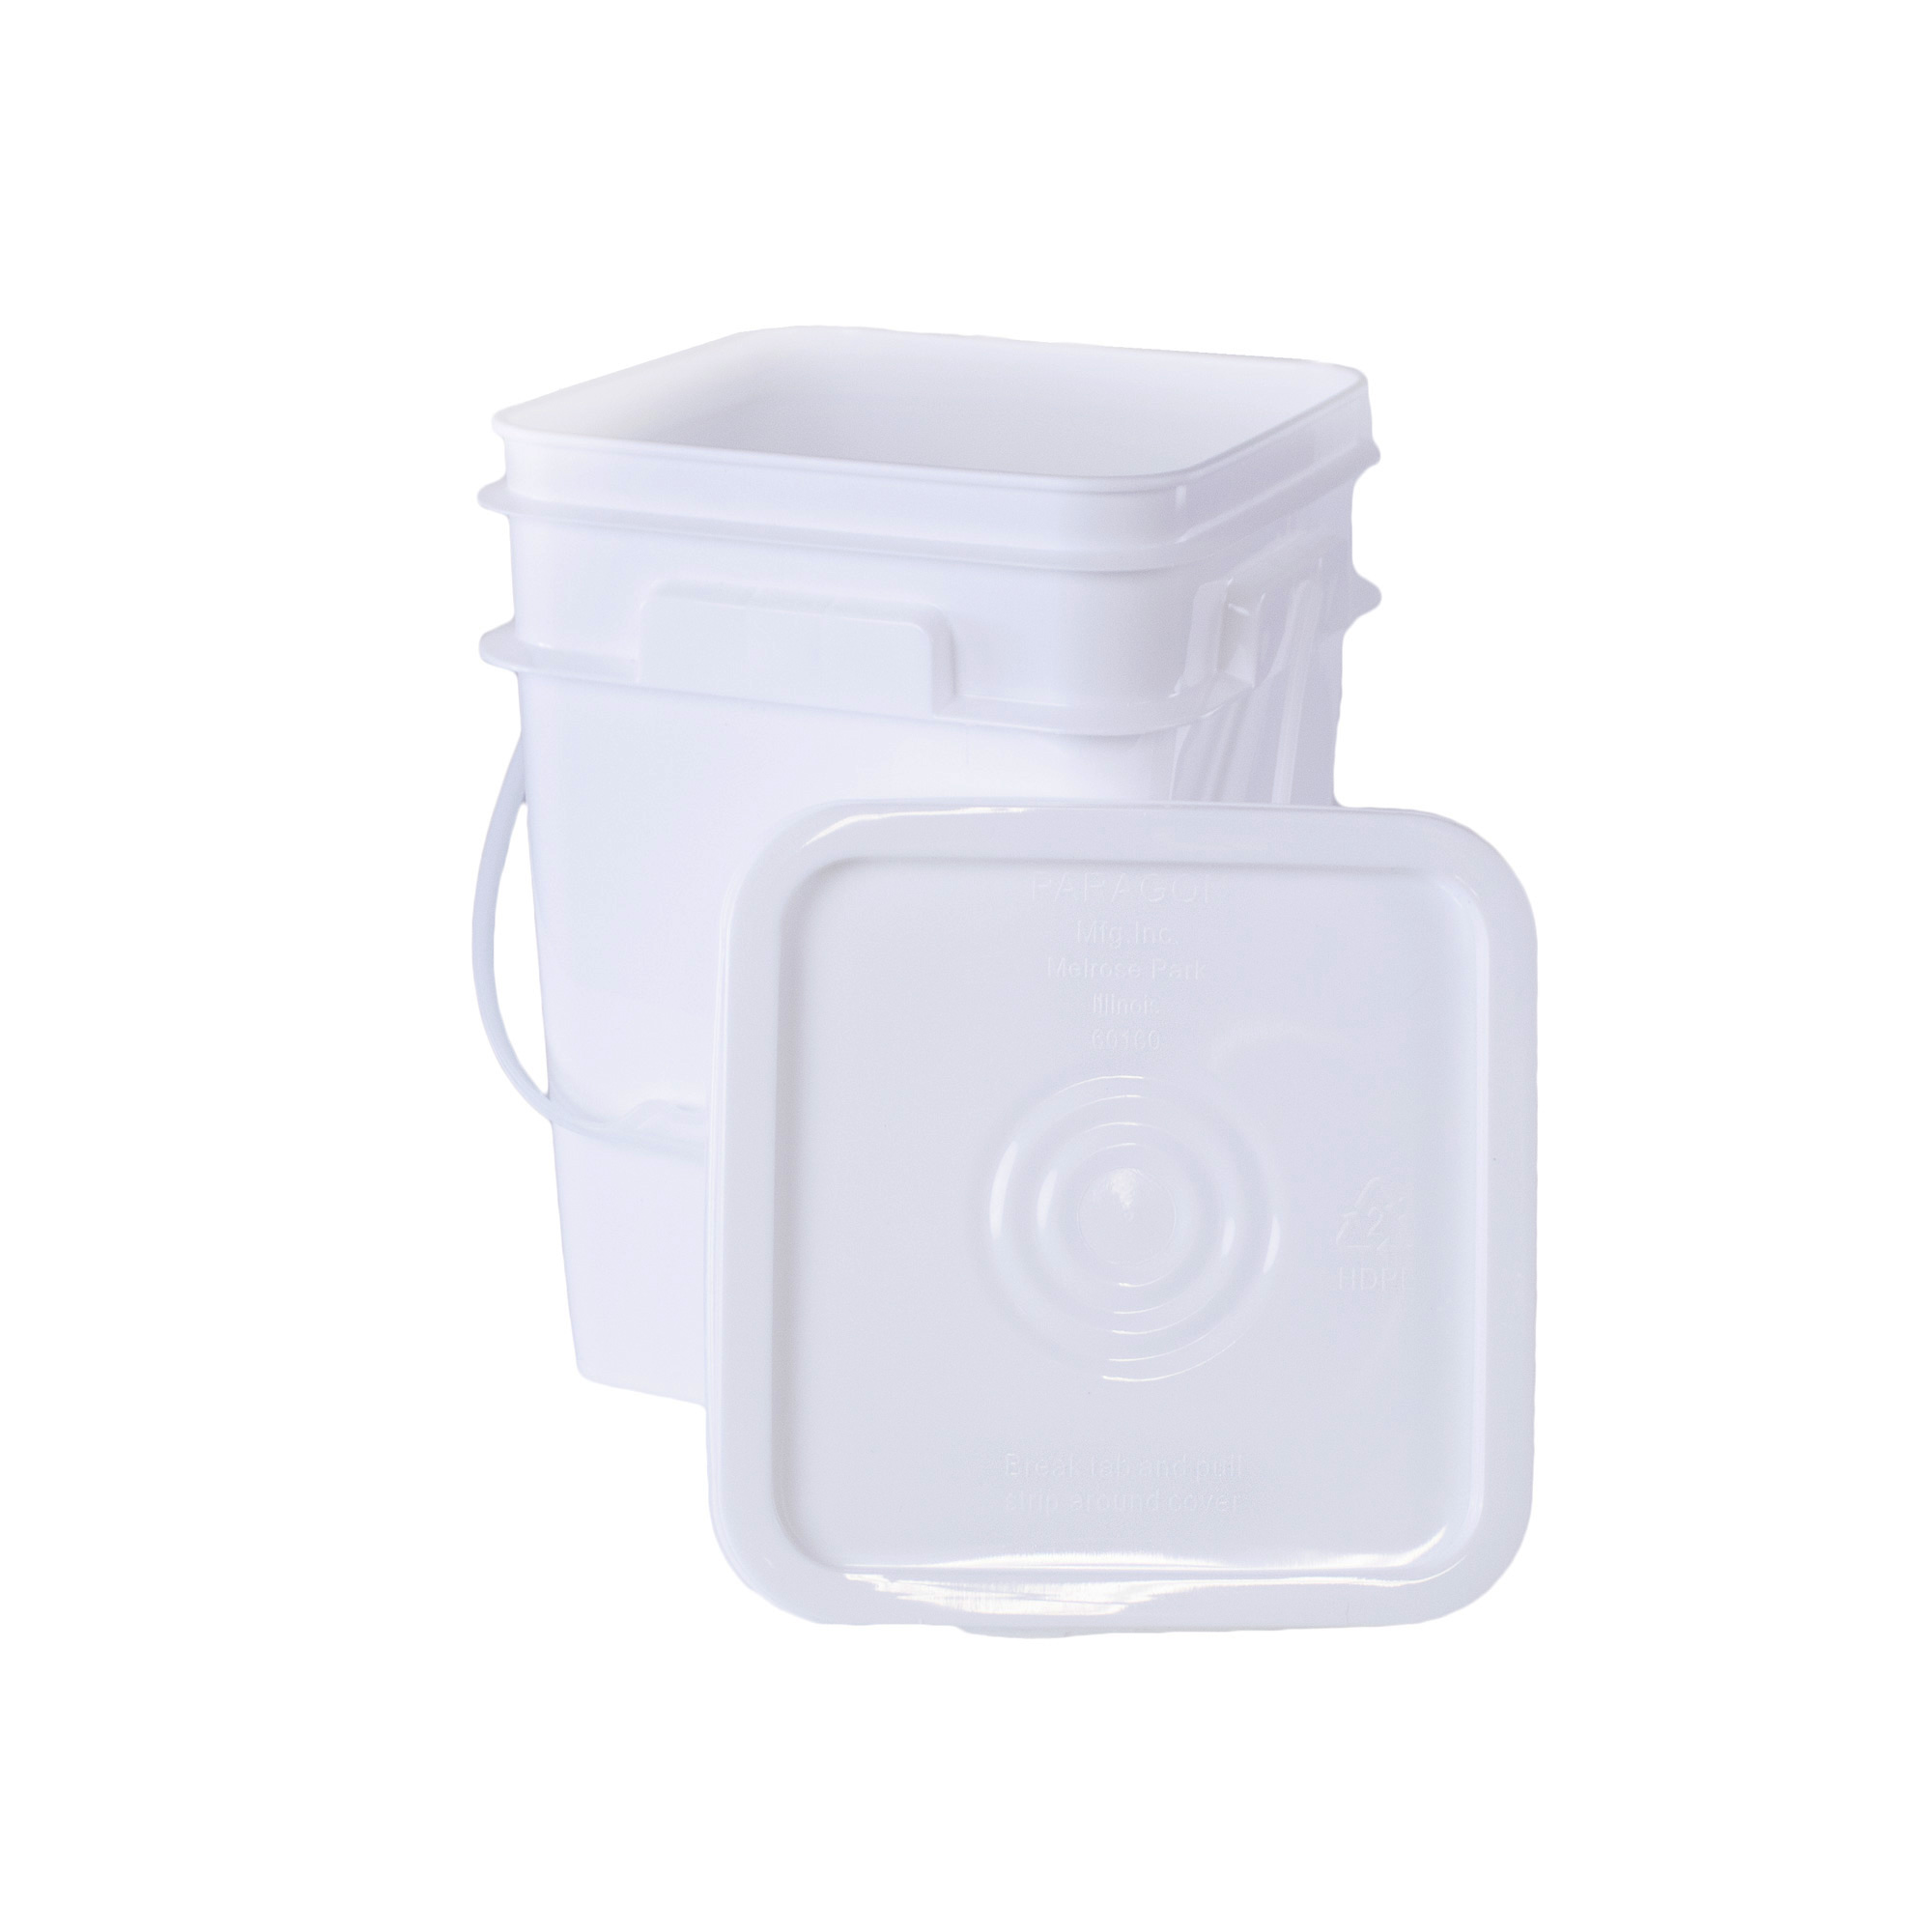 1 gal. BPA Free Food Grade Round Container with Lid (T808128 & L808) -  starting quantity 30 count - FREE SHIPPING